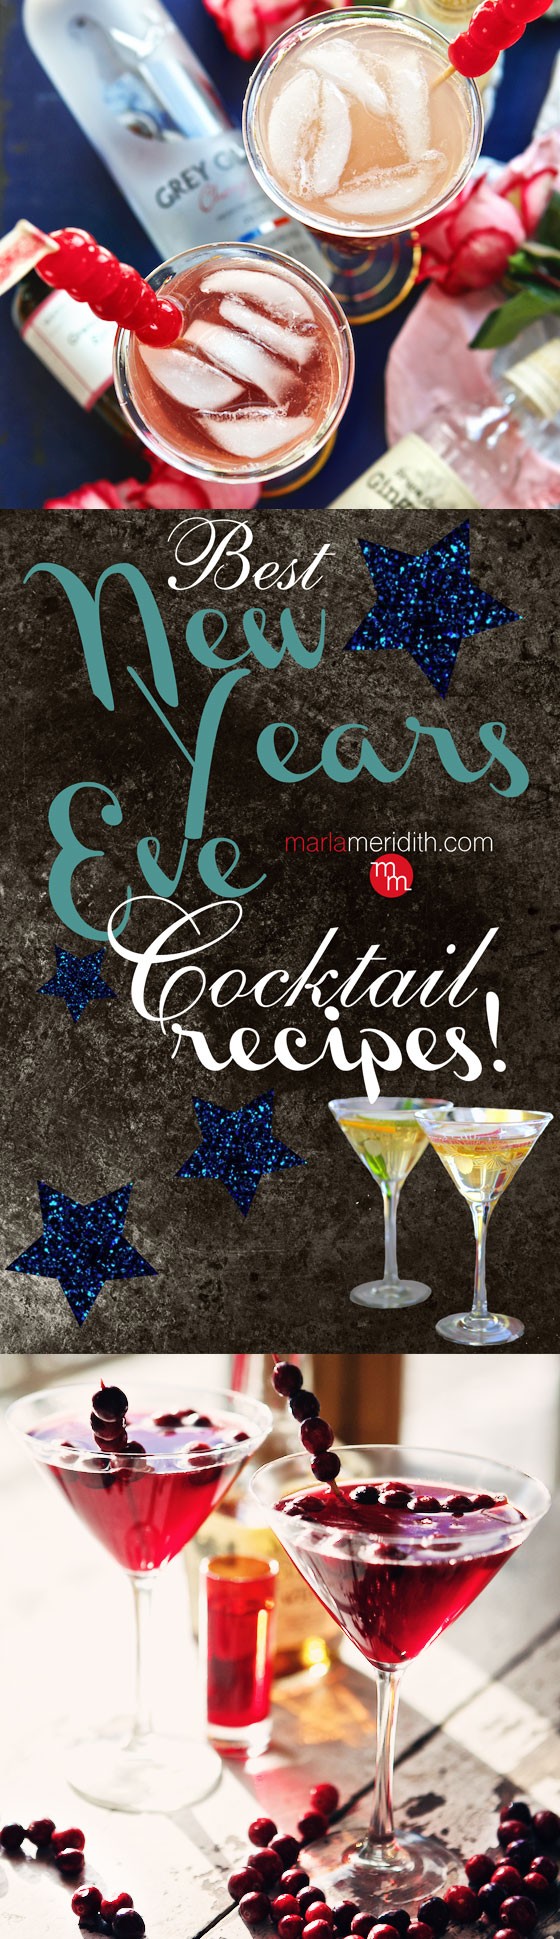 the BEST New Year's Eve Cocktail Recipes from around the web! MarlaMeridith.com